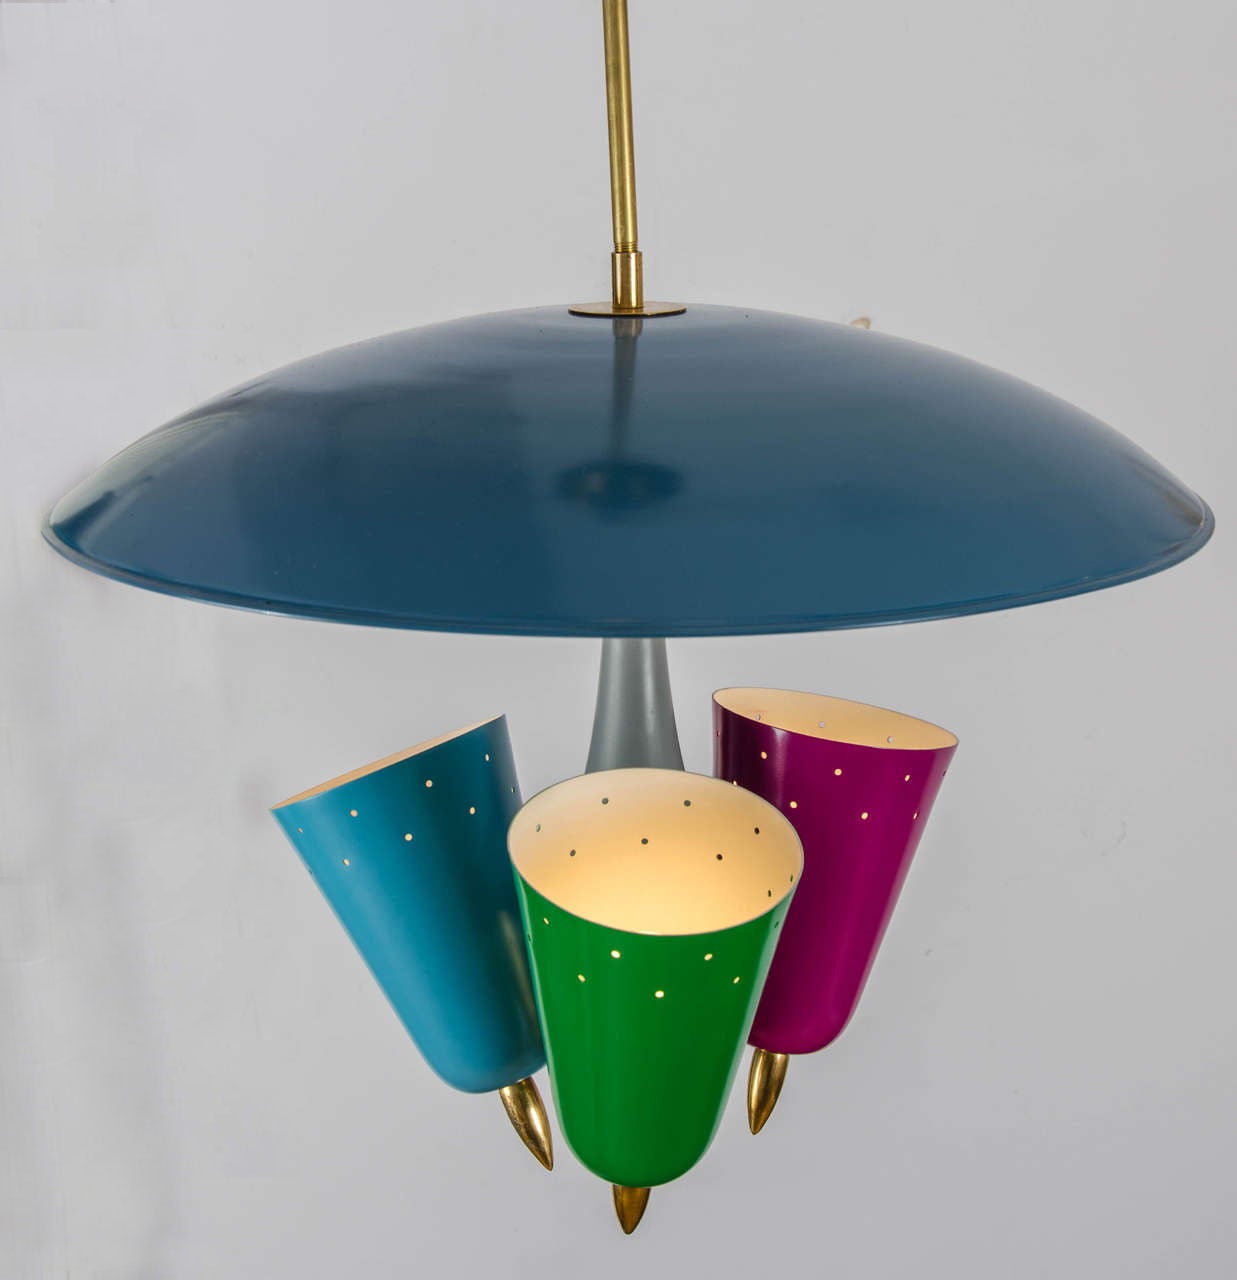 Mid Century Modern five colored metal pendant has three round cone shaped light sources in spun aluminium attach to brass fittings leading to a central umbrella shaped light diffuser hanging over the lights.